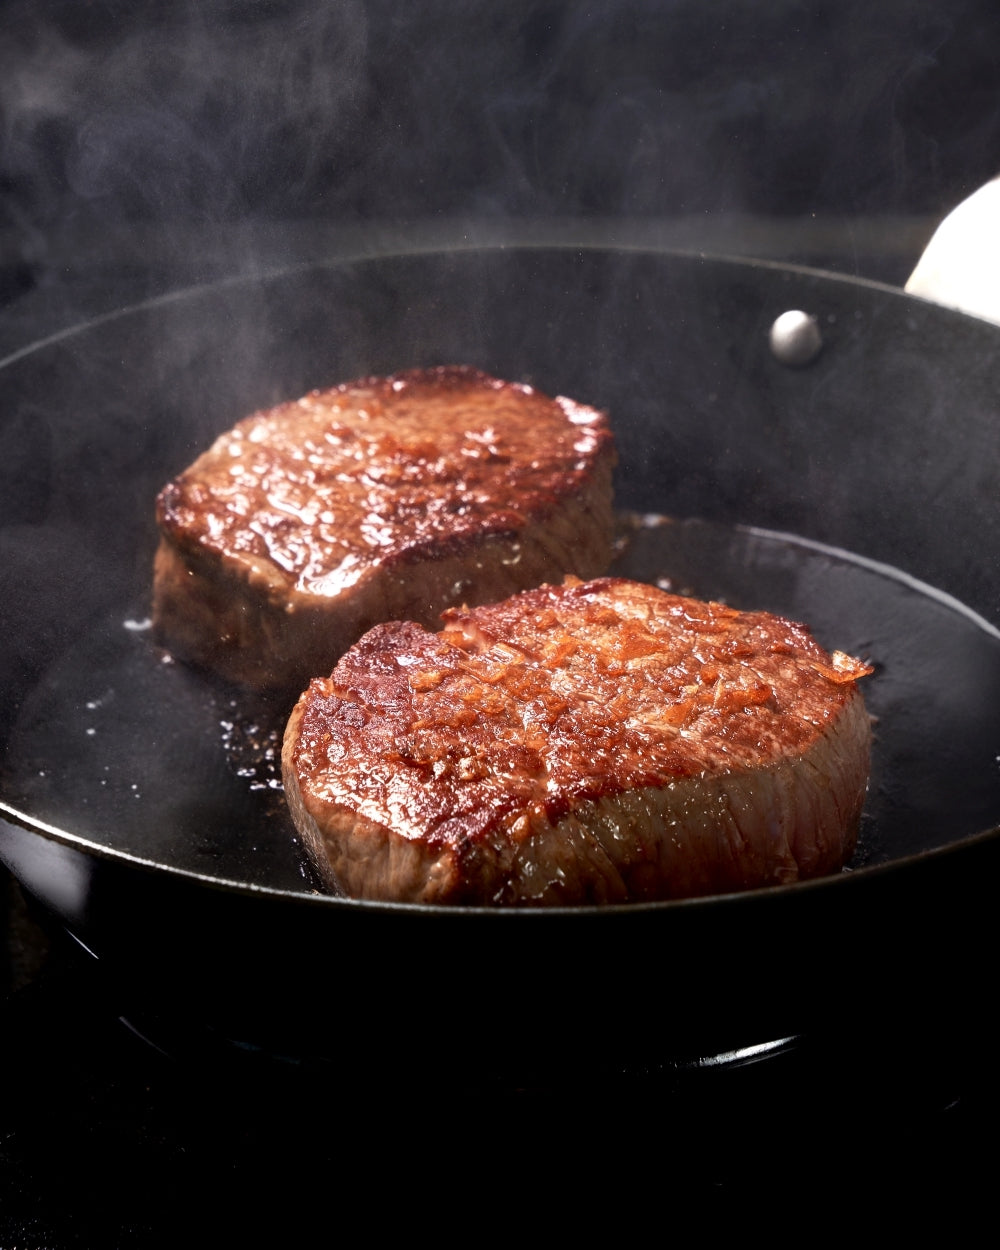 Want the best steak? Then you need this guide.